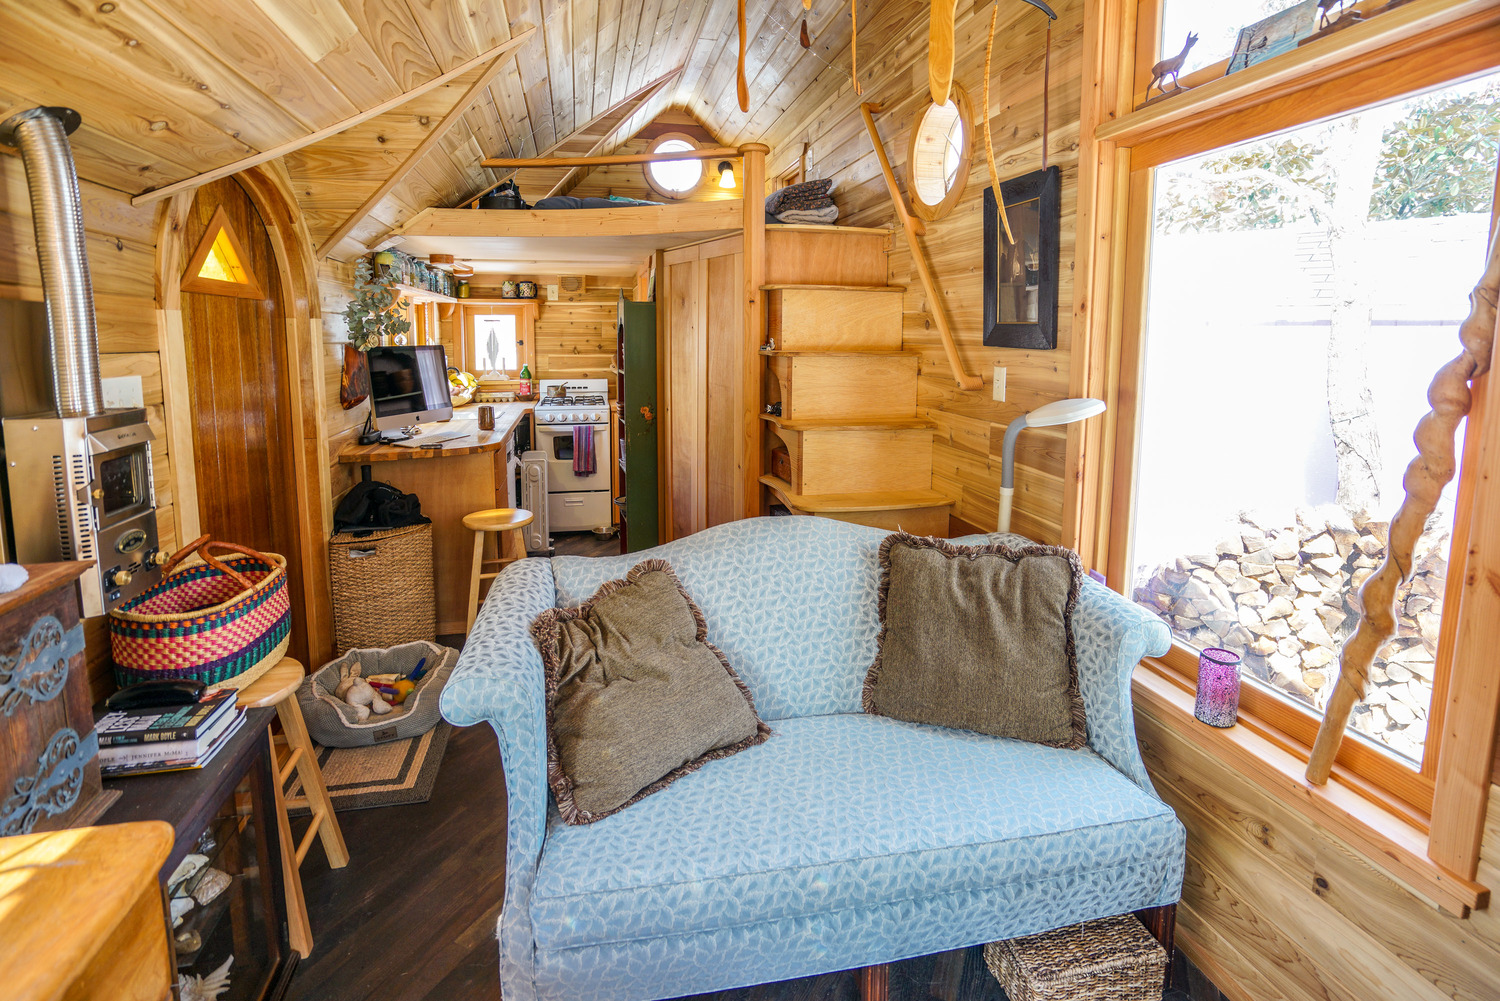 Tiny home interior entirely finished with wood, featuring a blue couch as the focal point.